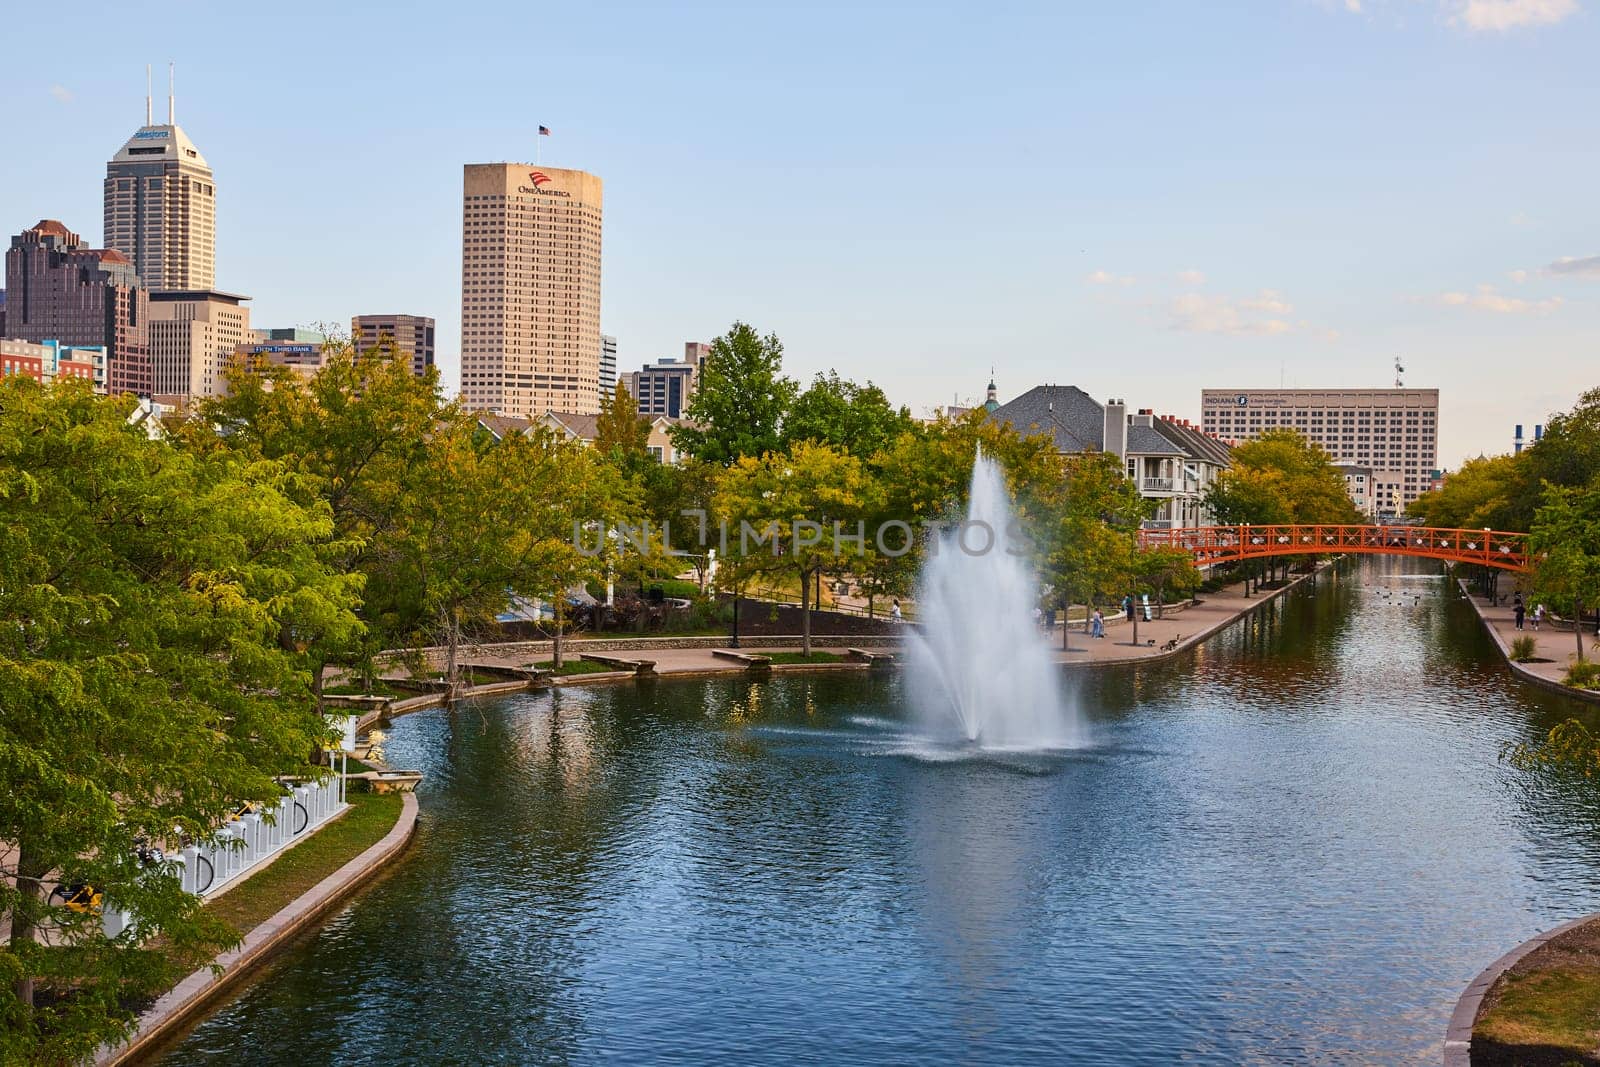 Urban Park and City Skyline with Fountain, Indianapolis by njproductions